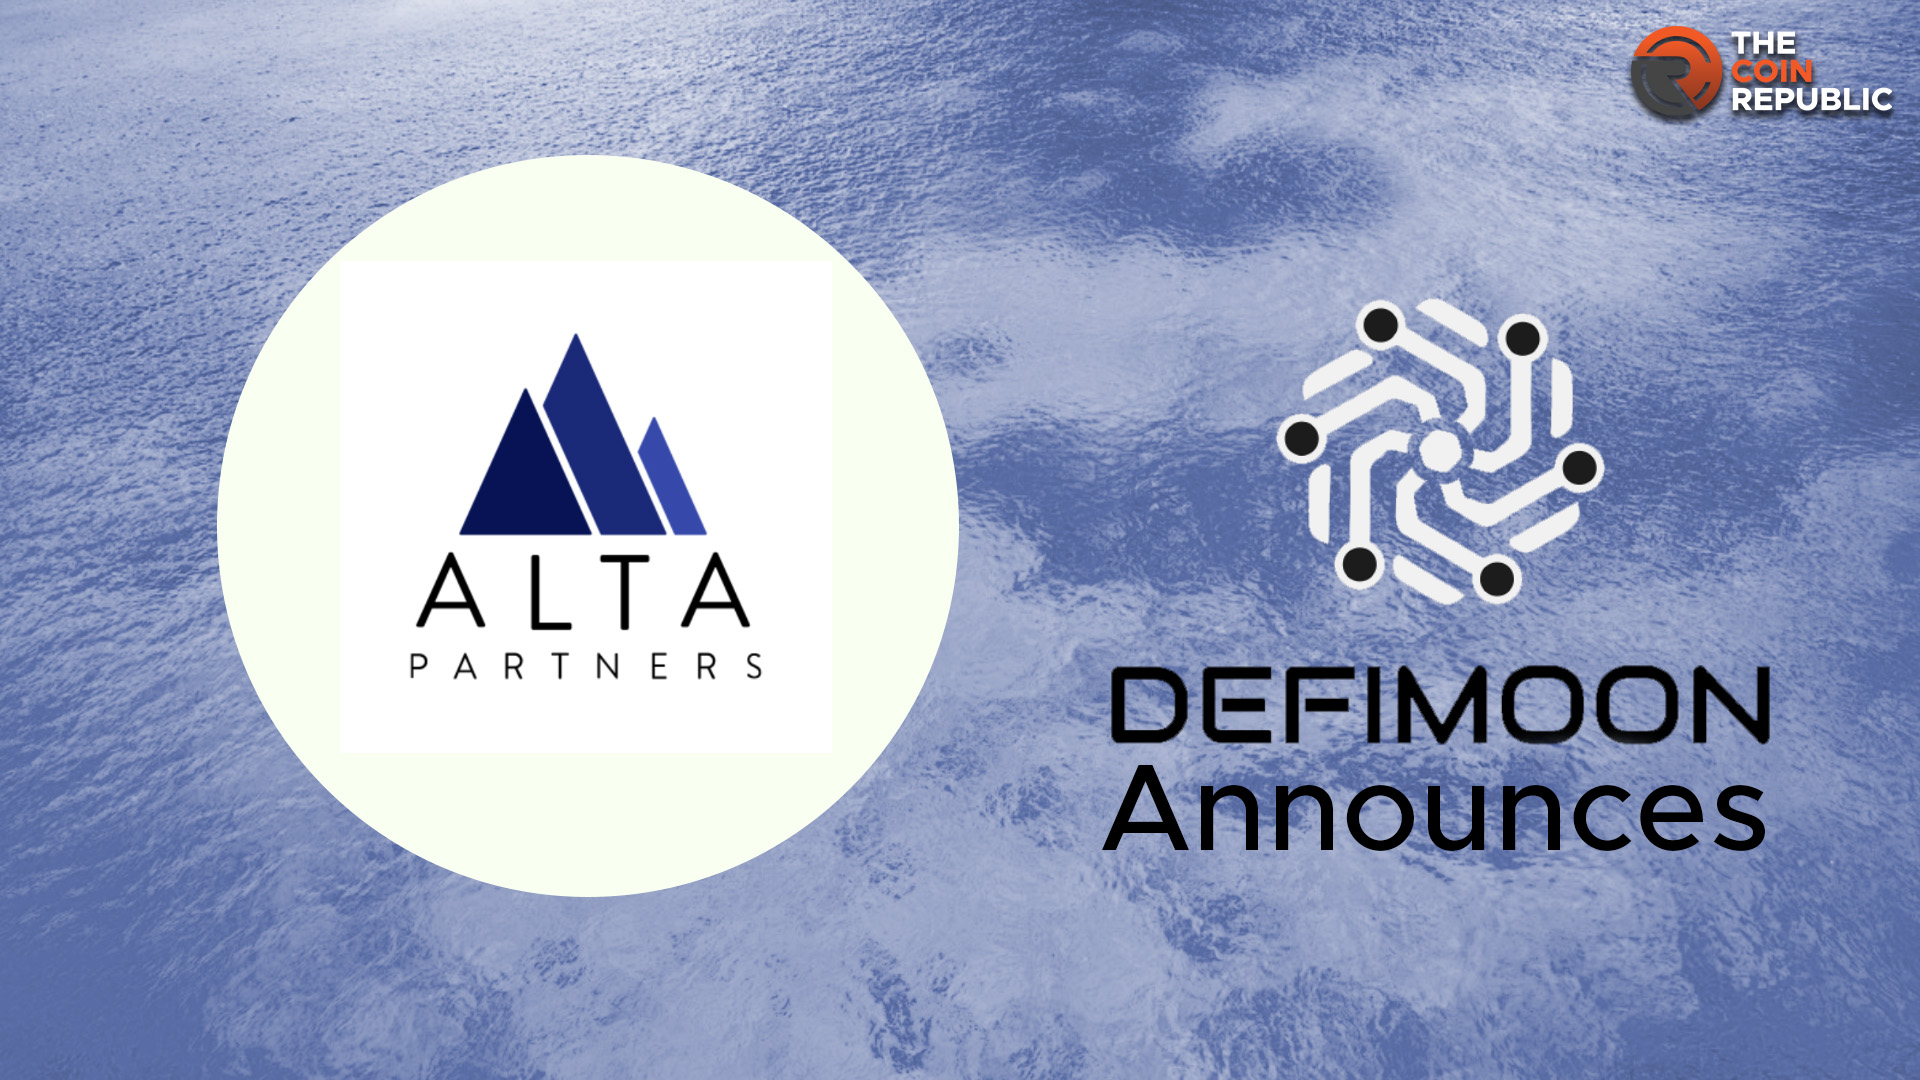 Defimoon Partners with ALTA to Fuel Crypto Industry’s Growth